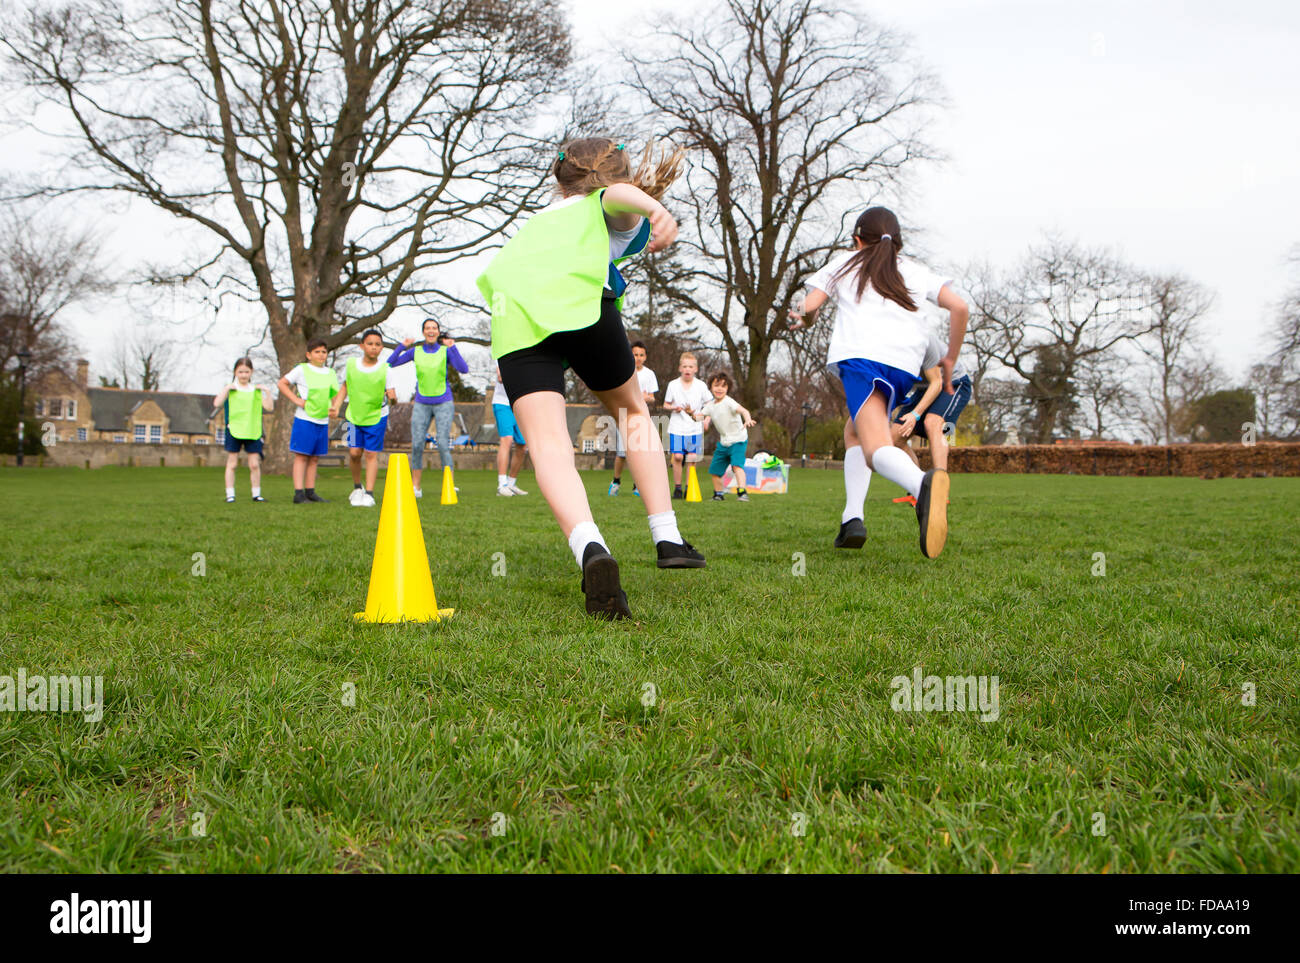 School children wearing sports uniform running around cones during a physical education session. Stock Photo